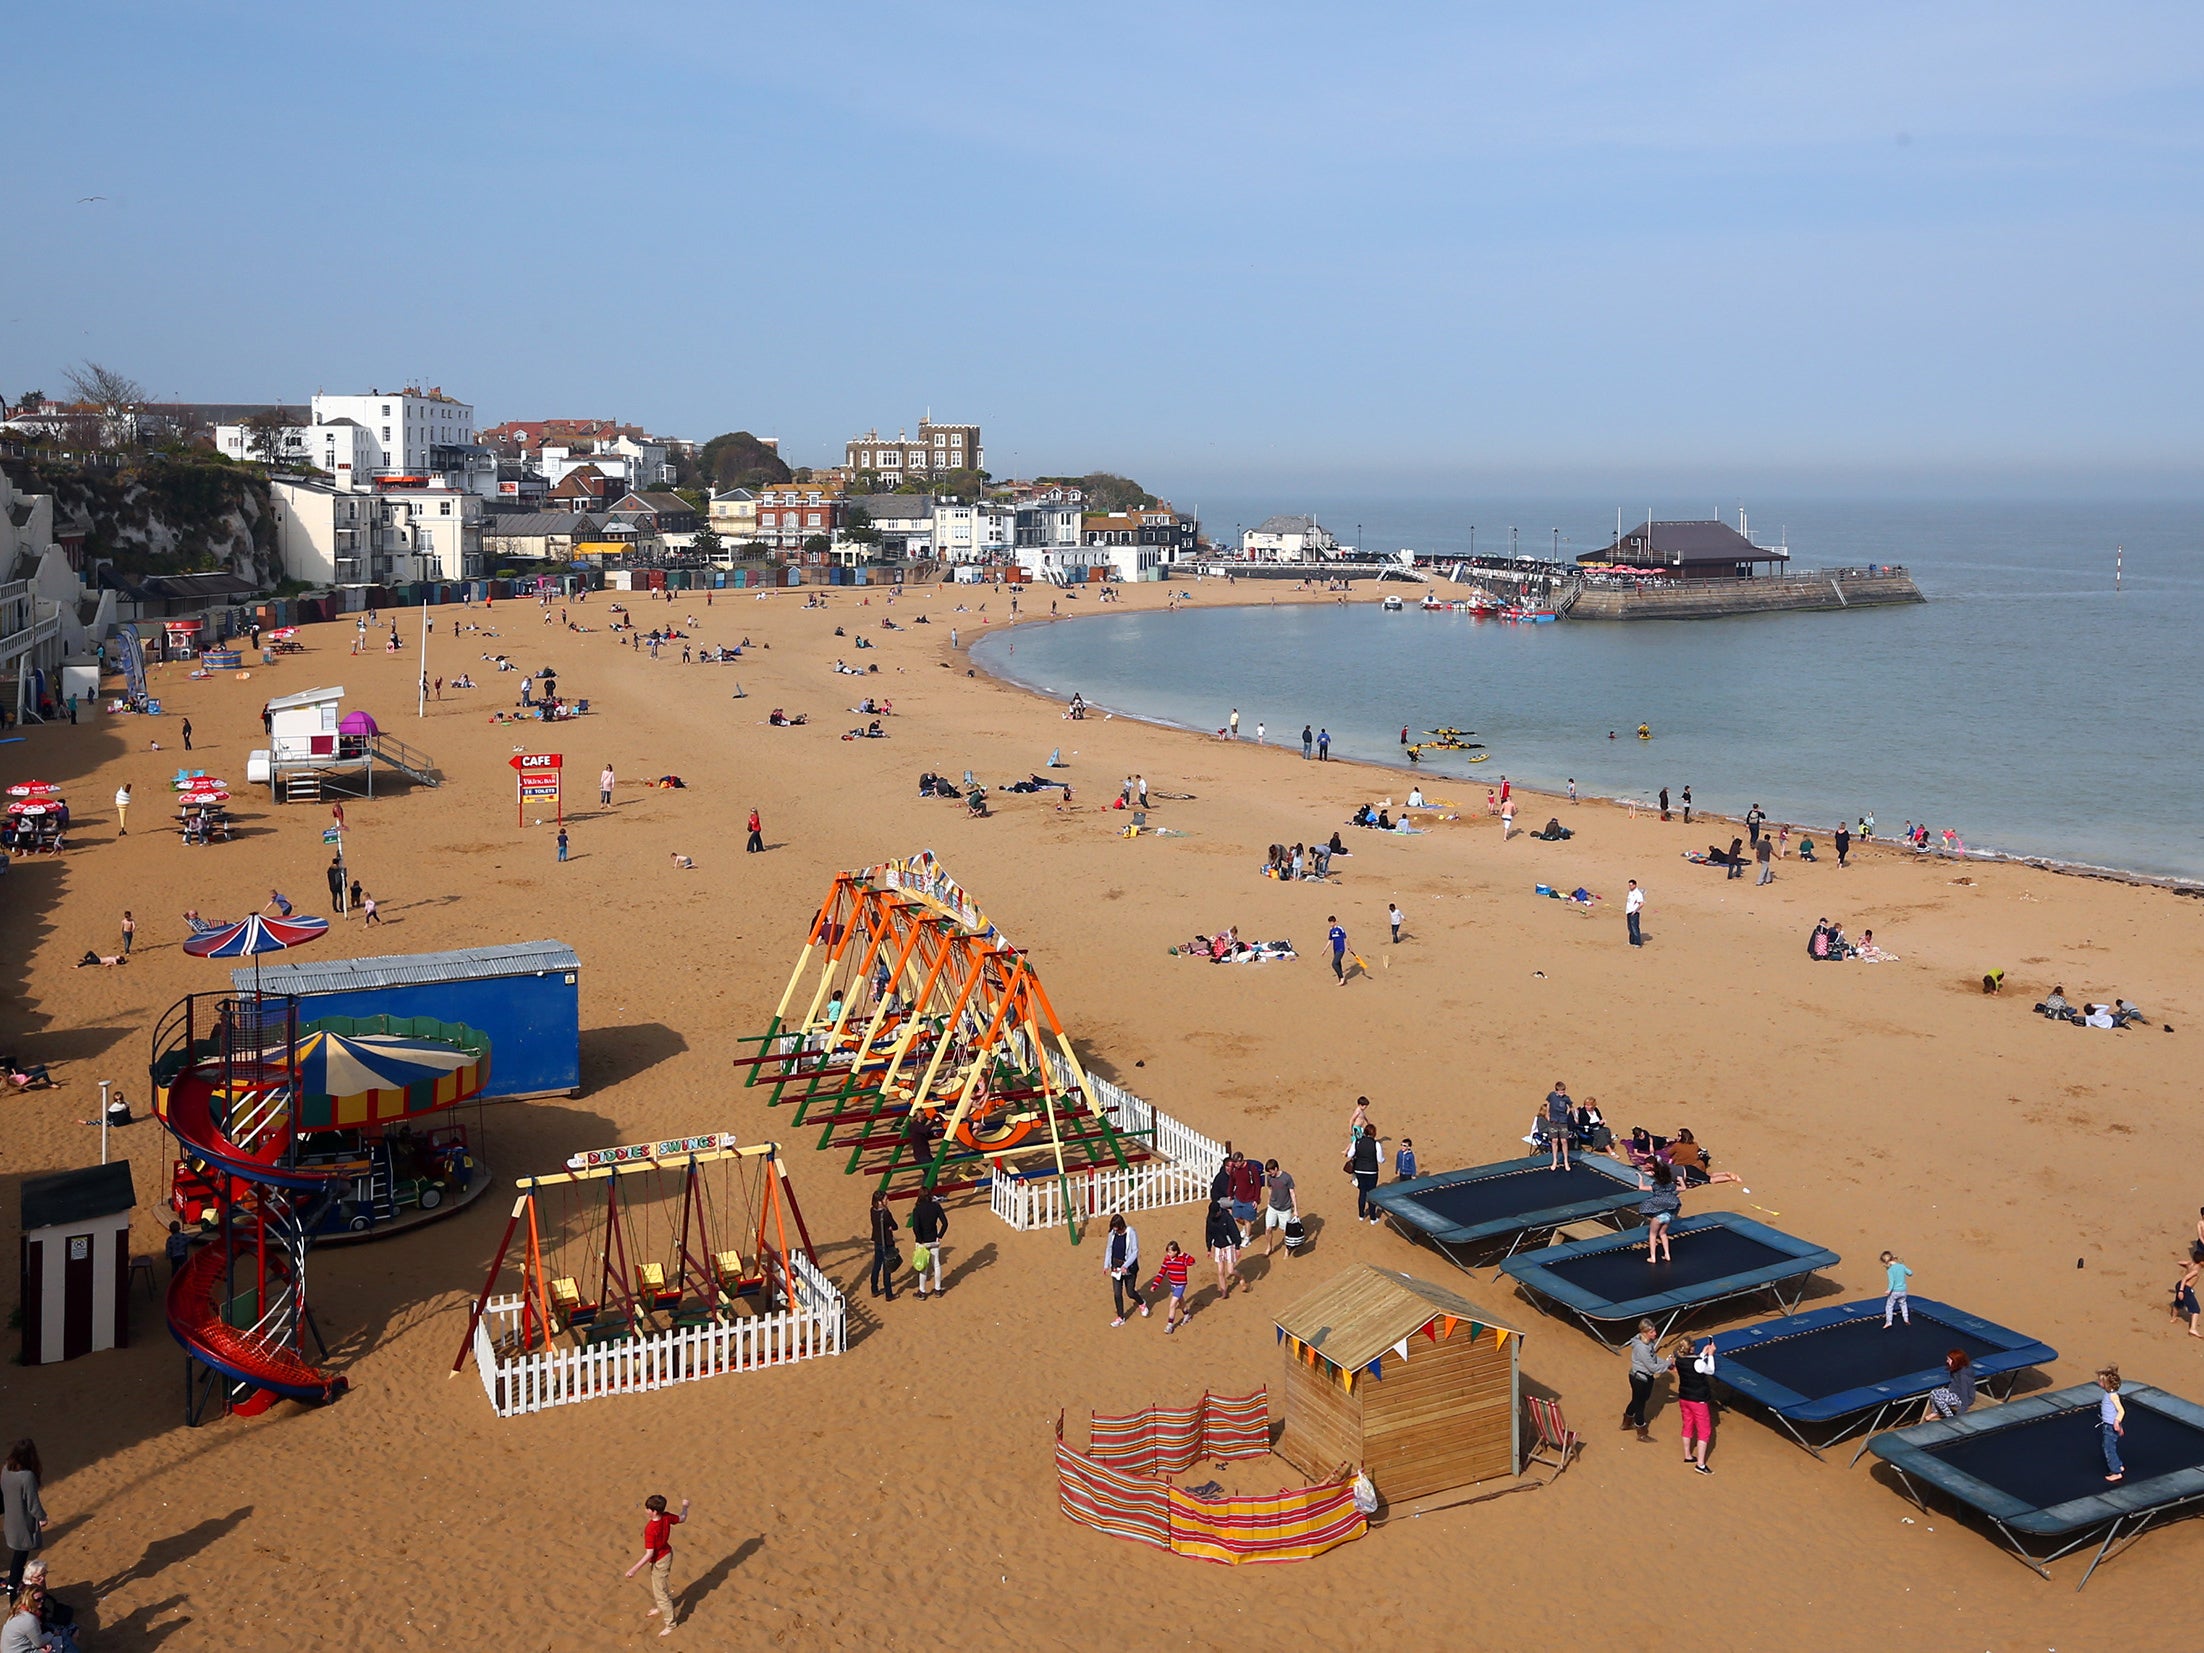 The teenager's body was recovered off the coast of Broadstairs beach